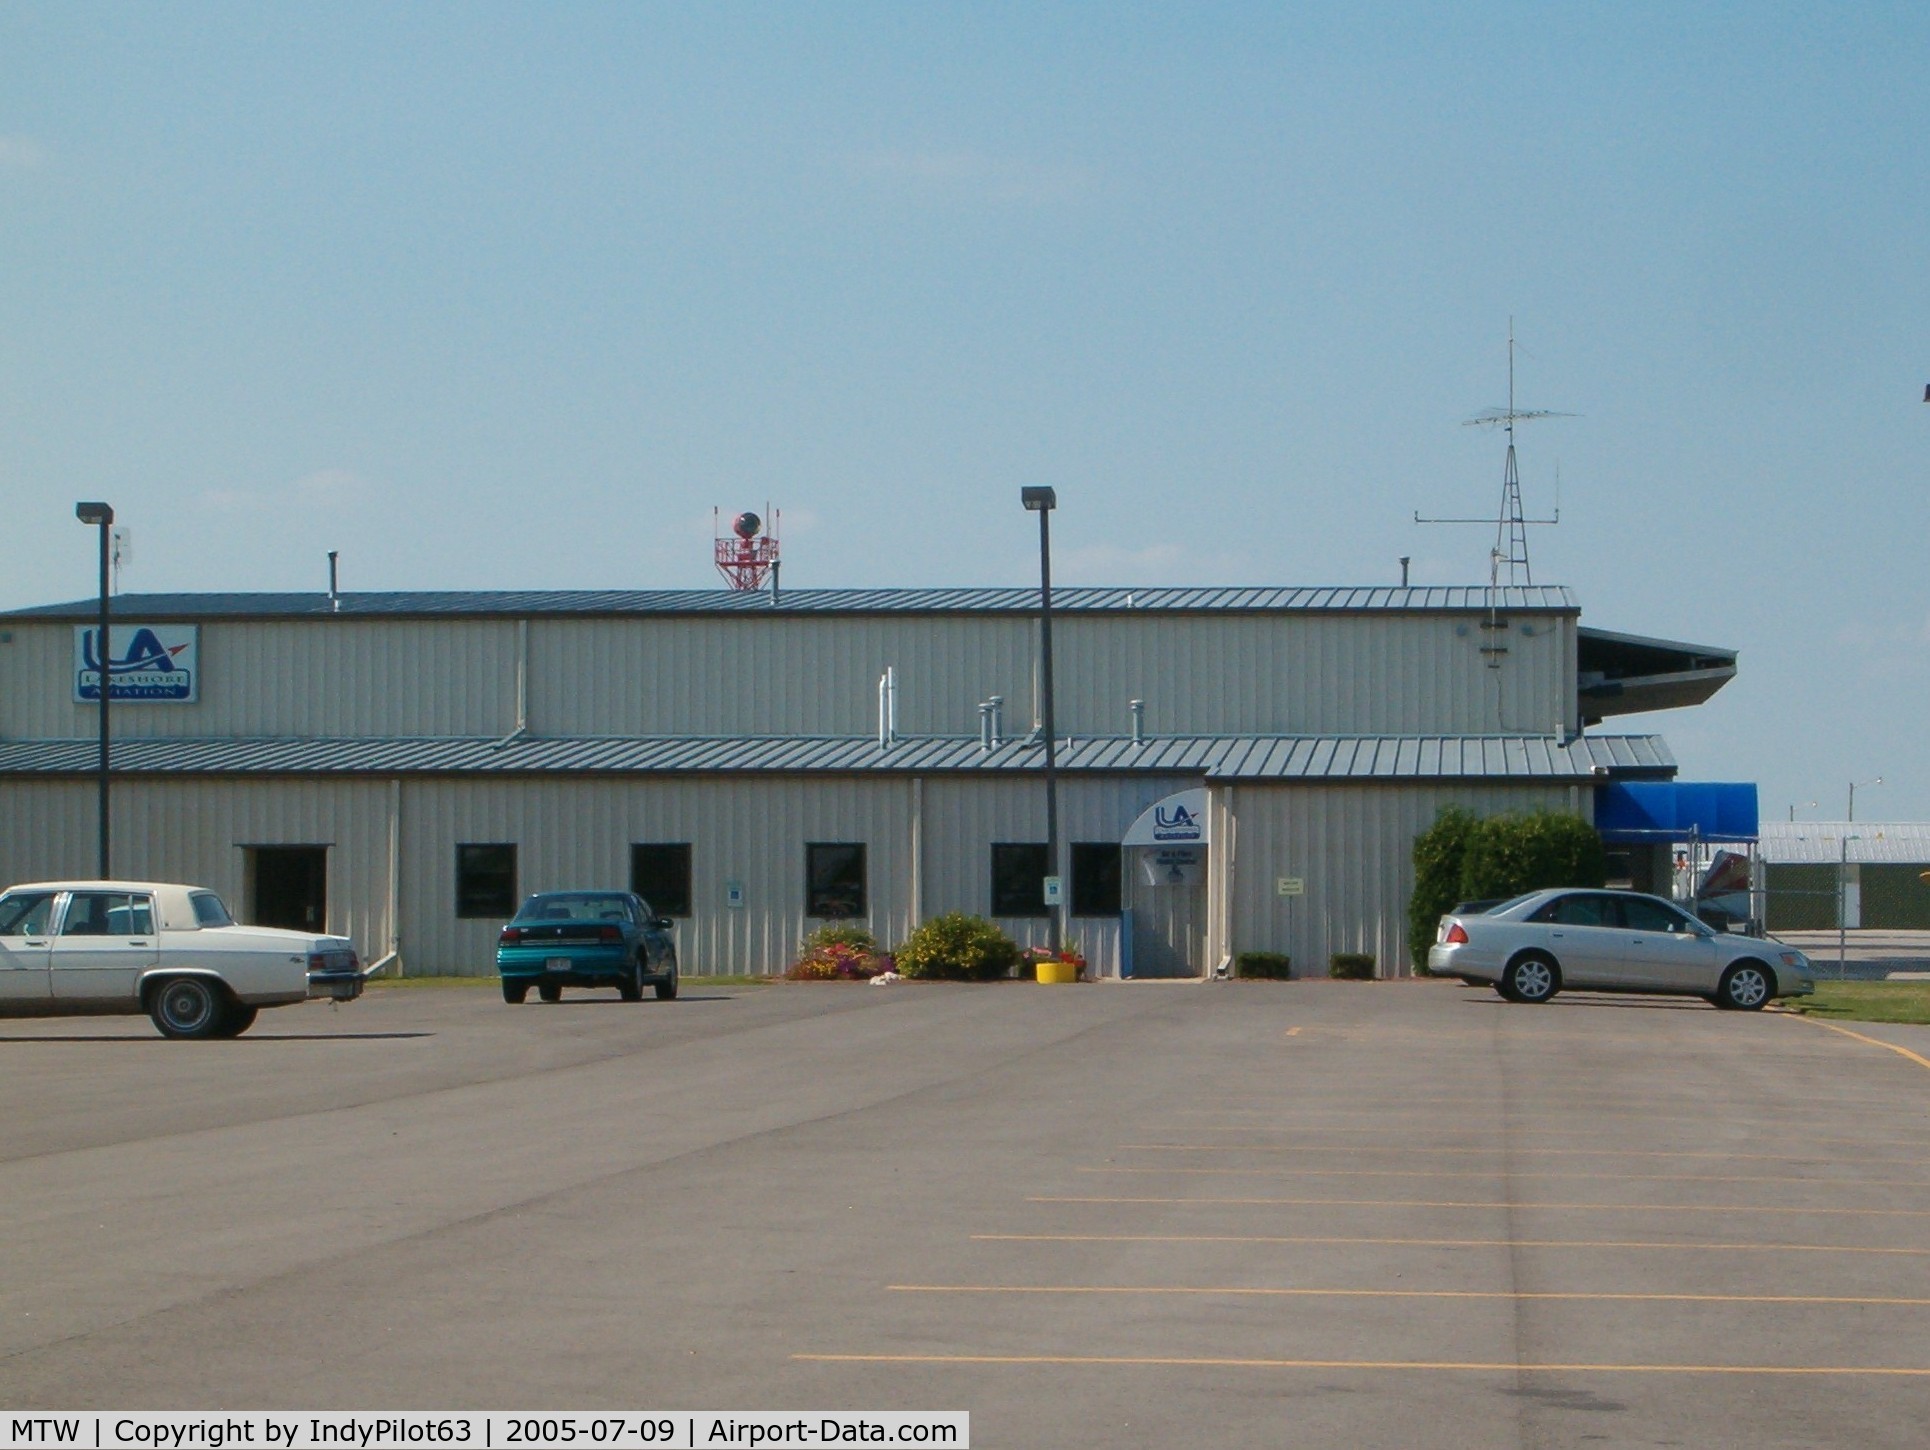 Manitowoc County Airport (MTW) - FBO Building, with friendly staff